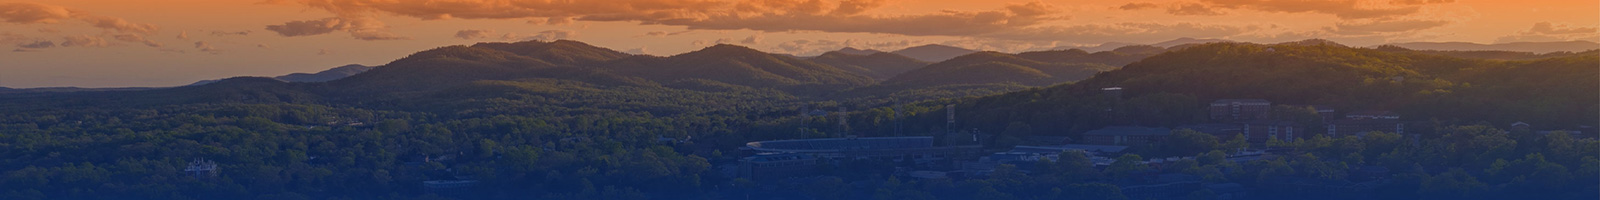 The mountainous skyline west of Charlottesville in a gradient of UVA Orange and Blue